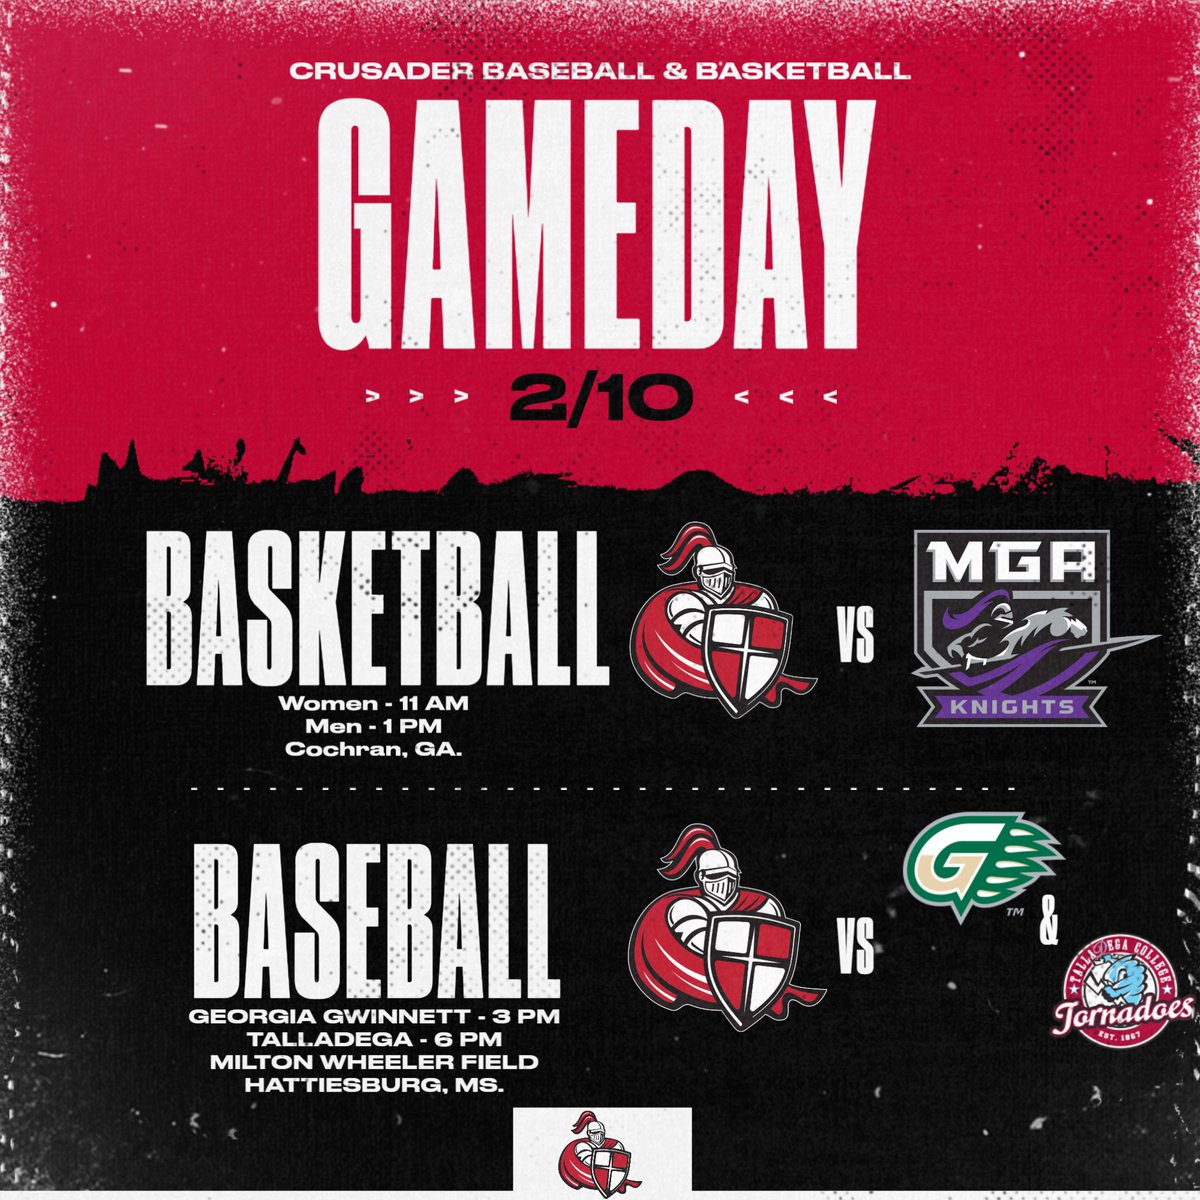 GAMEDAY! Basketball & baseball are both in action today. Men's & women's basketball travel to Cochran, GA. to take on Middle Georgia. Women play at 11 AM CST and the men at 1 PM CST. Baseball host Georgia Gwinnett & Talladega in their two games. They face Georgia Gwinnett at 3…